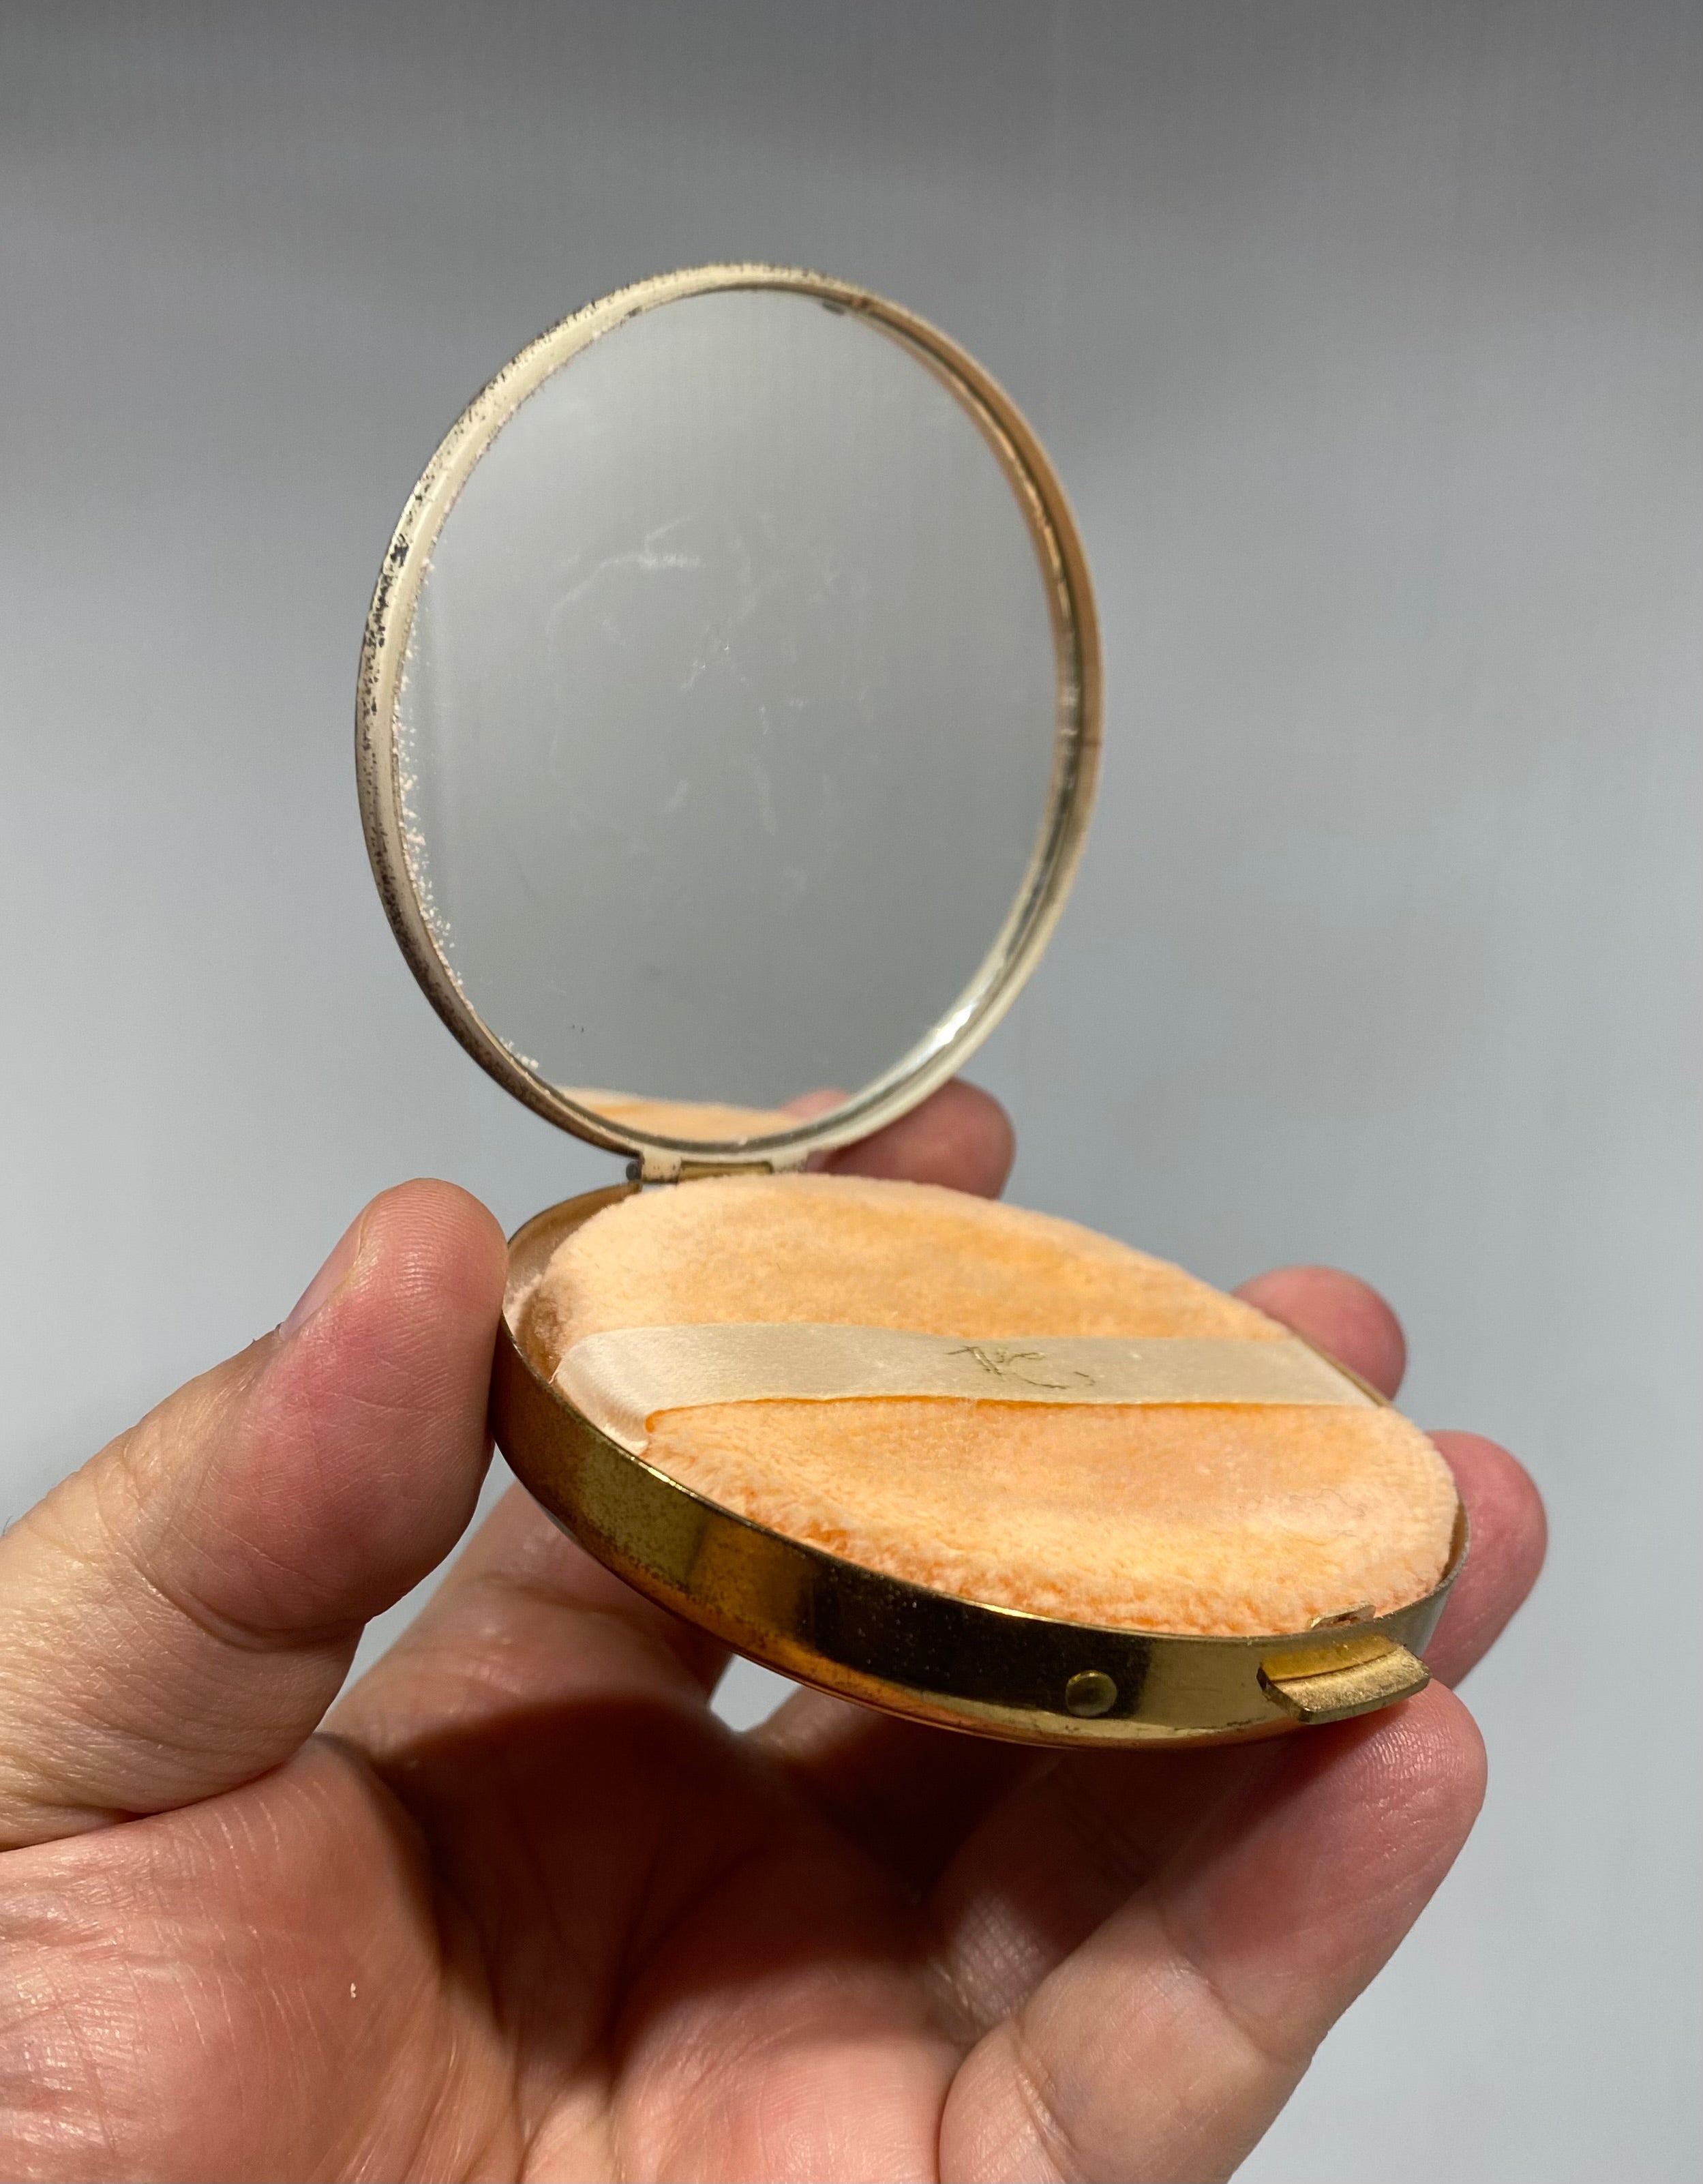 Vintage, 1950s, Makeup compact with mirror in a high quality goldtone metal case.